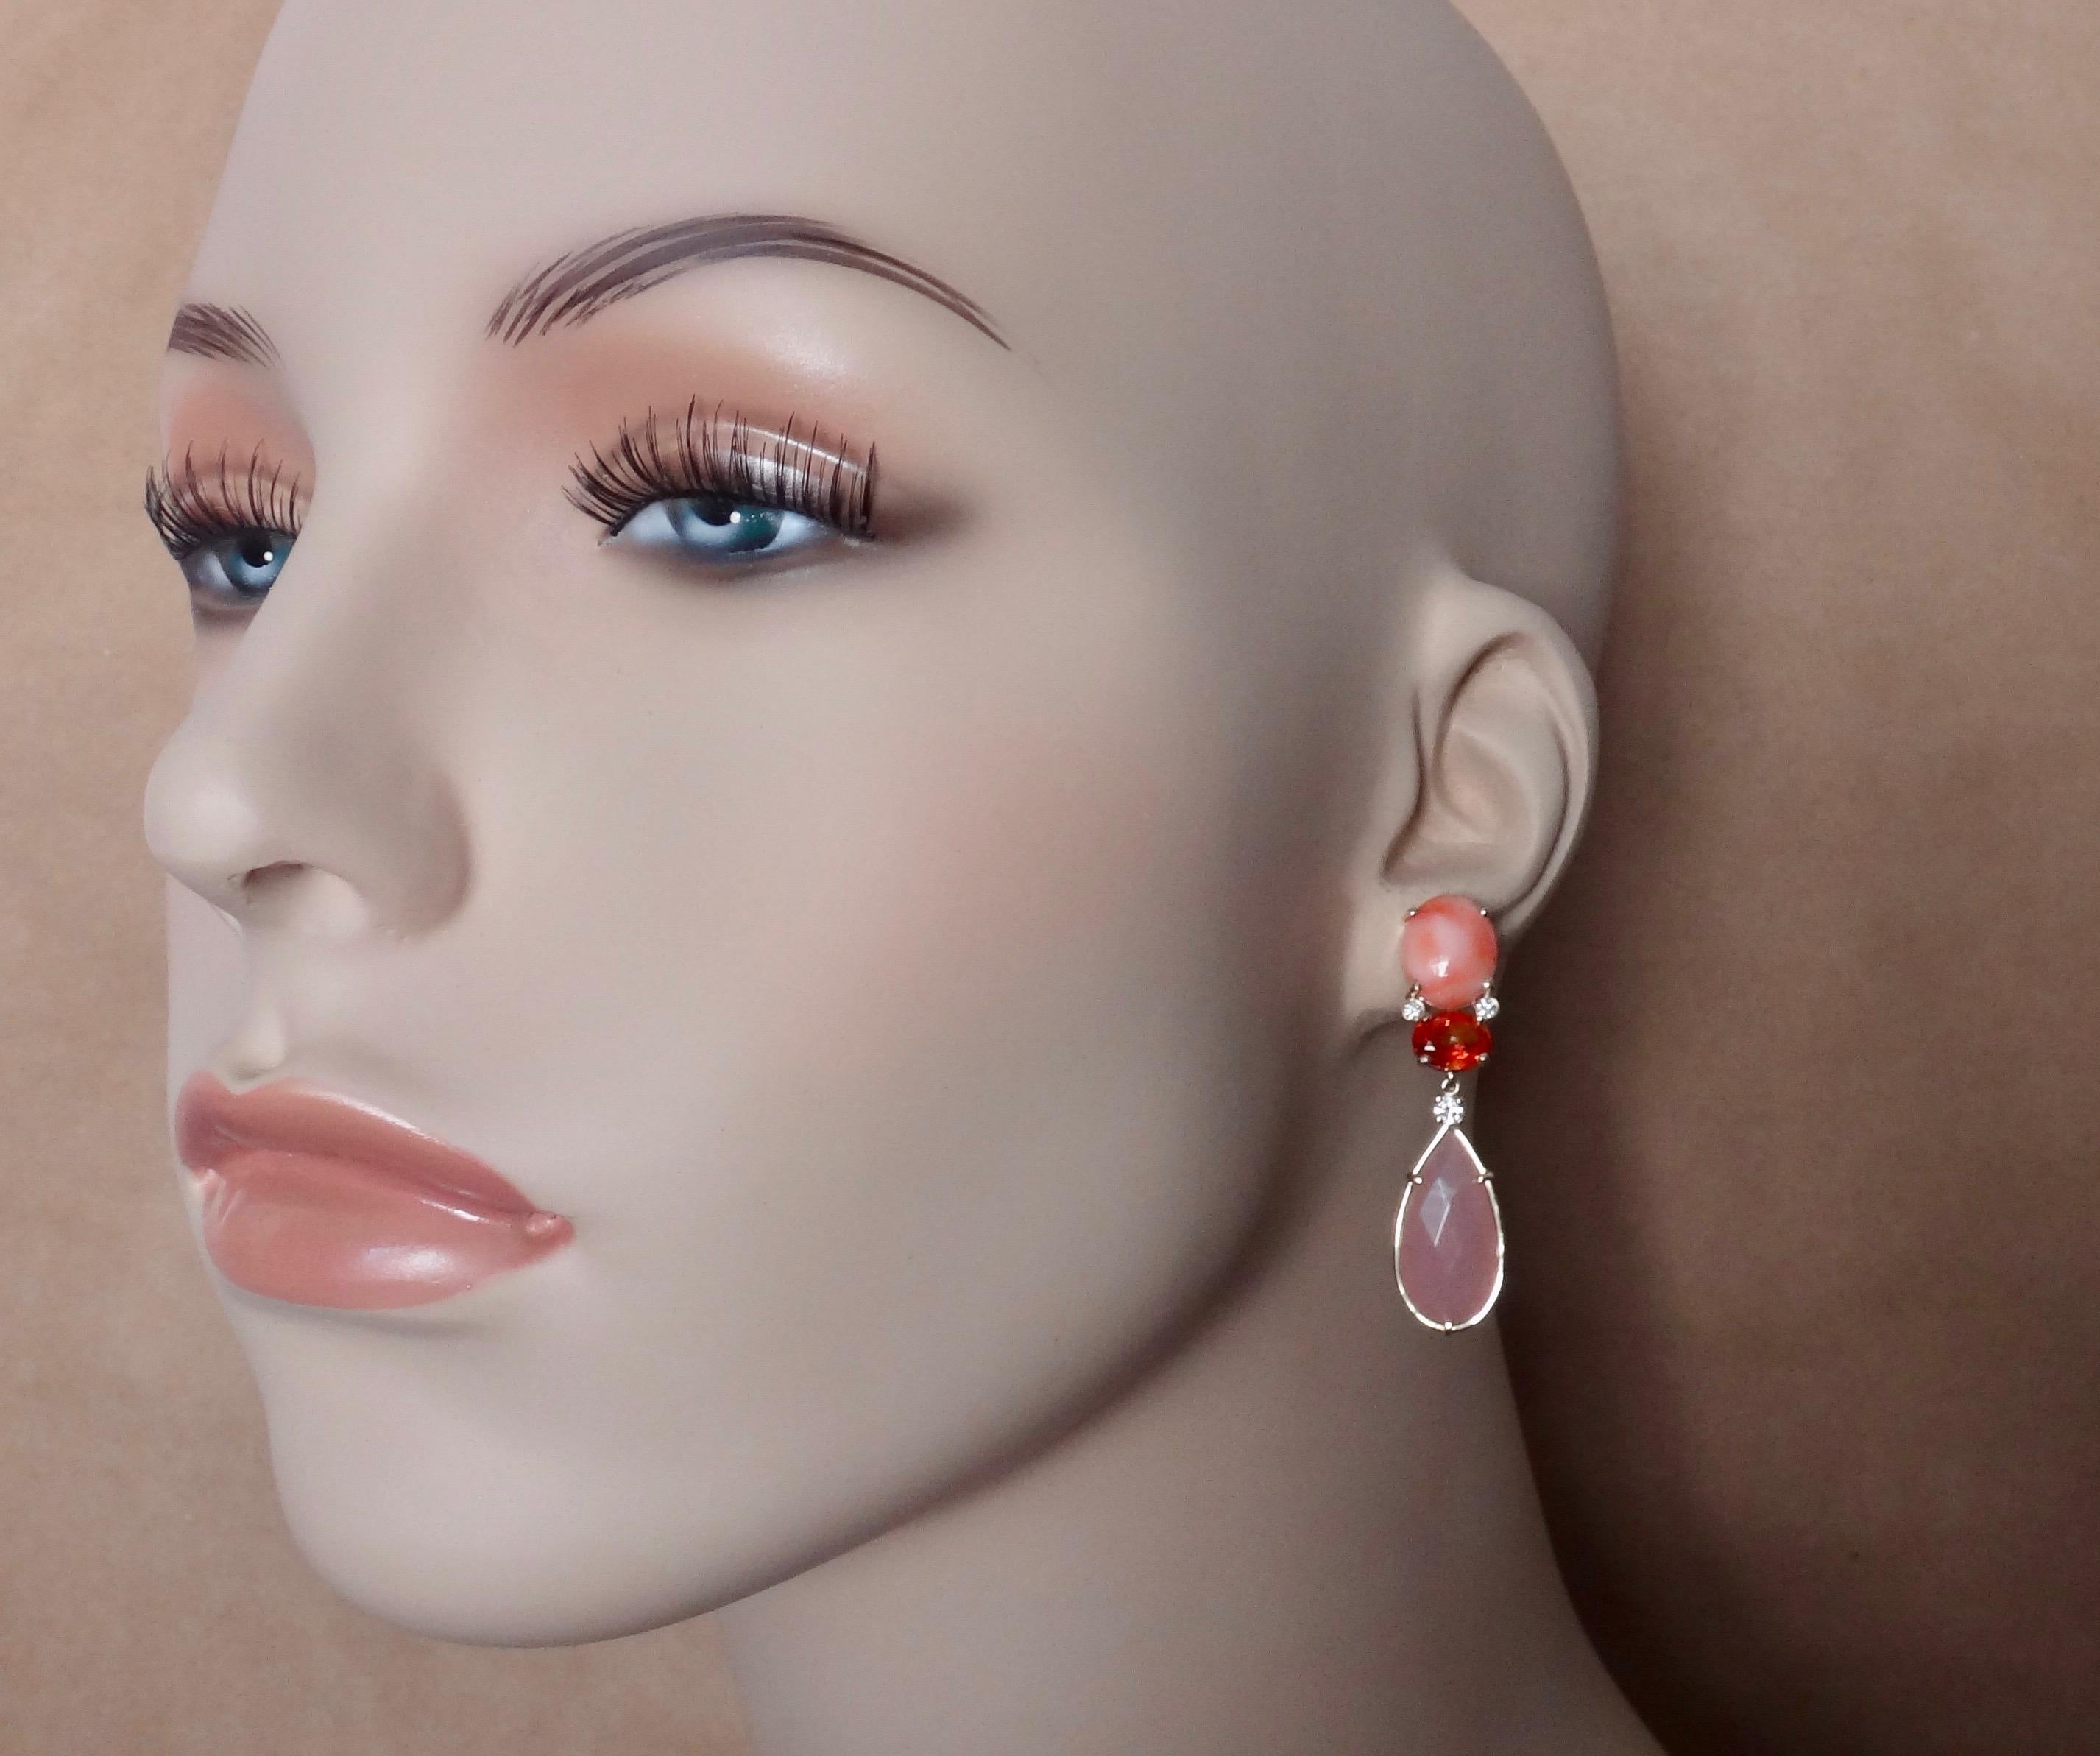 Coral (origin: Japan) is combined with intensely colored orange fire opal (origin: Mexico) and pink opal (origin: Peru) in these delicate dangle earrings.  This sophisticated palette beautifully highlights the modeled pink coral with the lighter